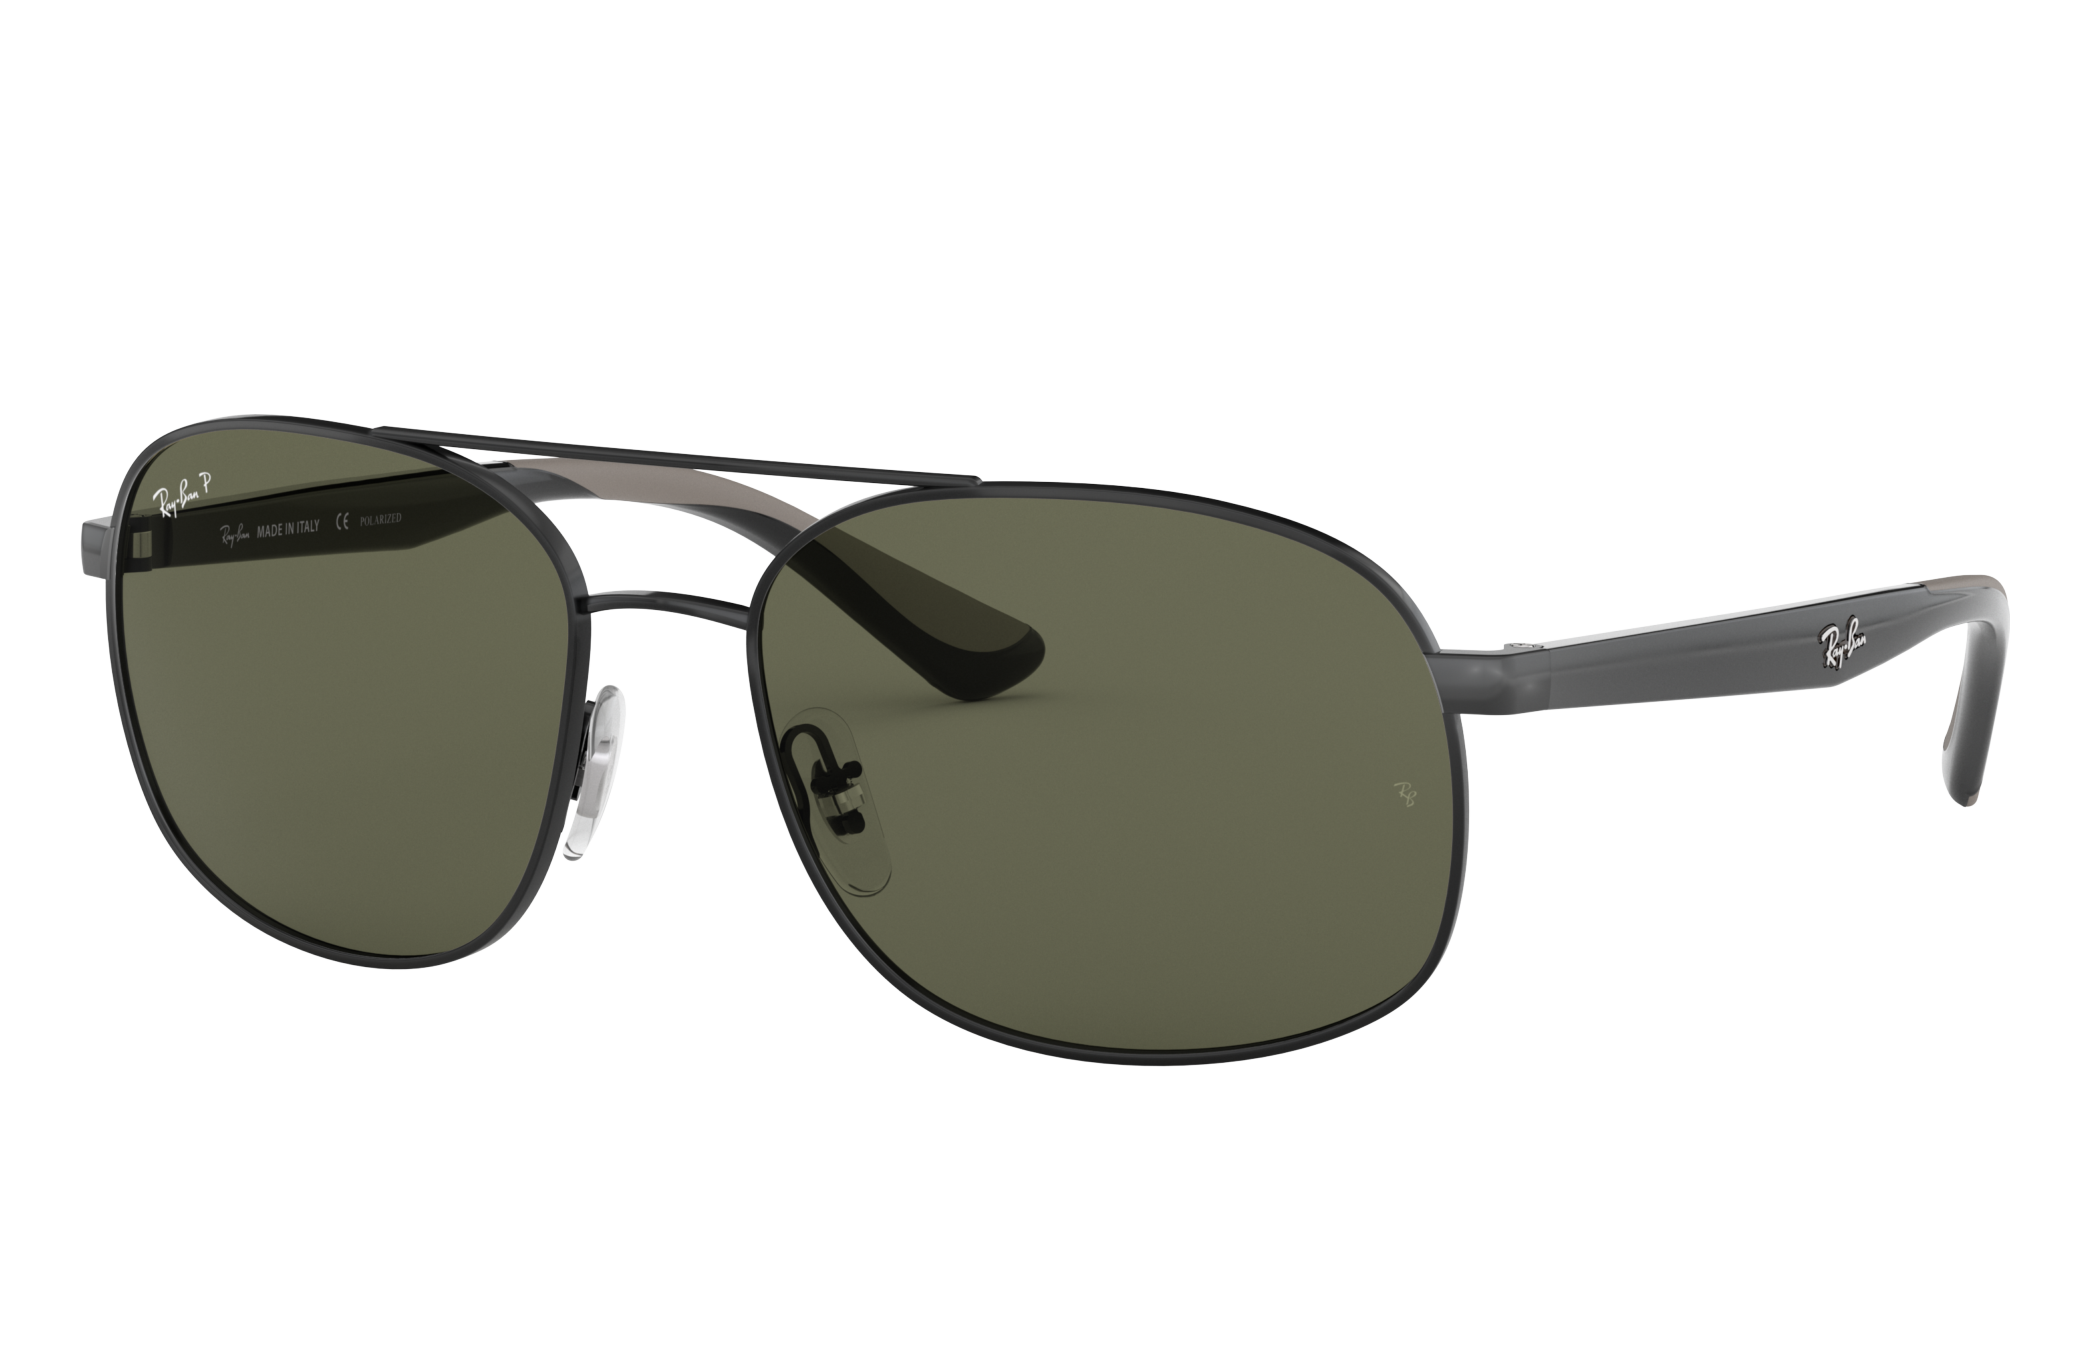 RB3593 Sunglasses in Black and Green - RB3593 | Ray-Ban®